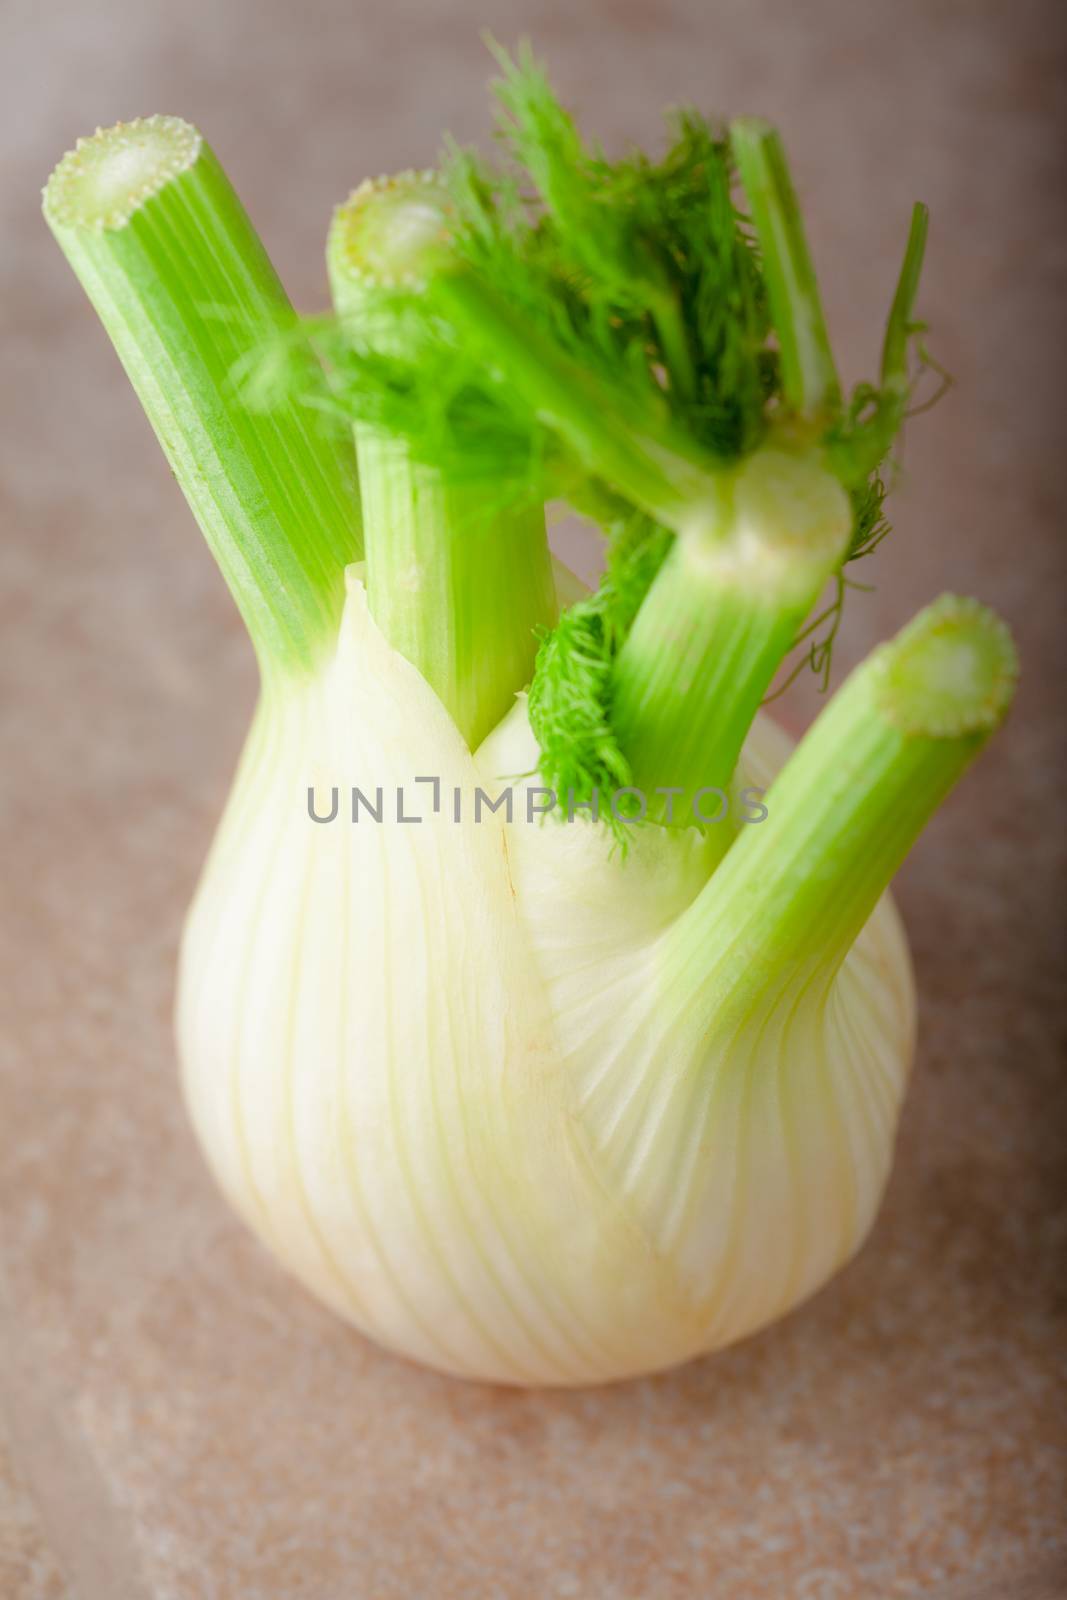 A fresh green Fennel on a wooden surface.